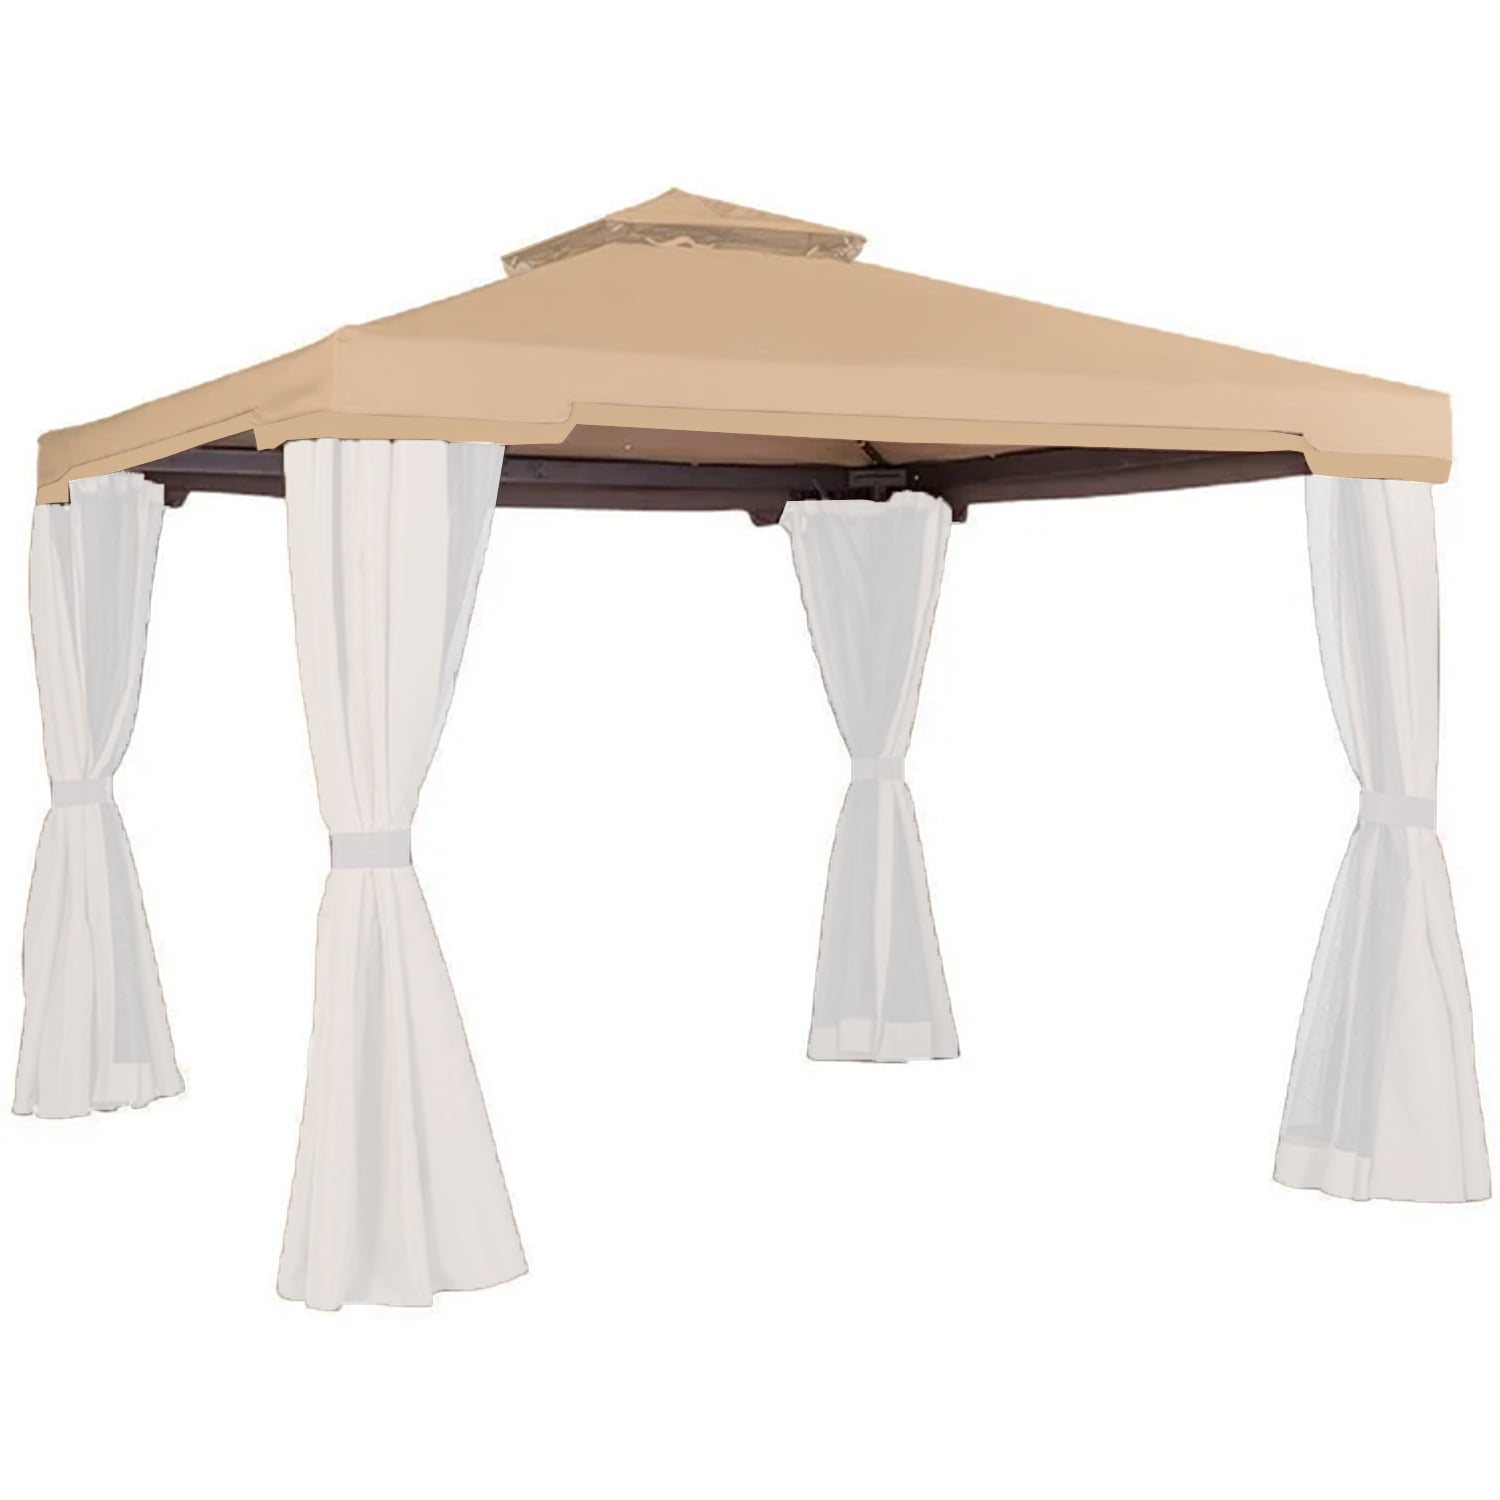 Garden Winds Replacement Canopy Top Cover Compatible with The Suncrown  F008007B64 10x10 Gazebo - Riplock 350